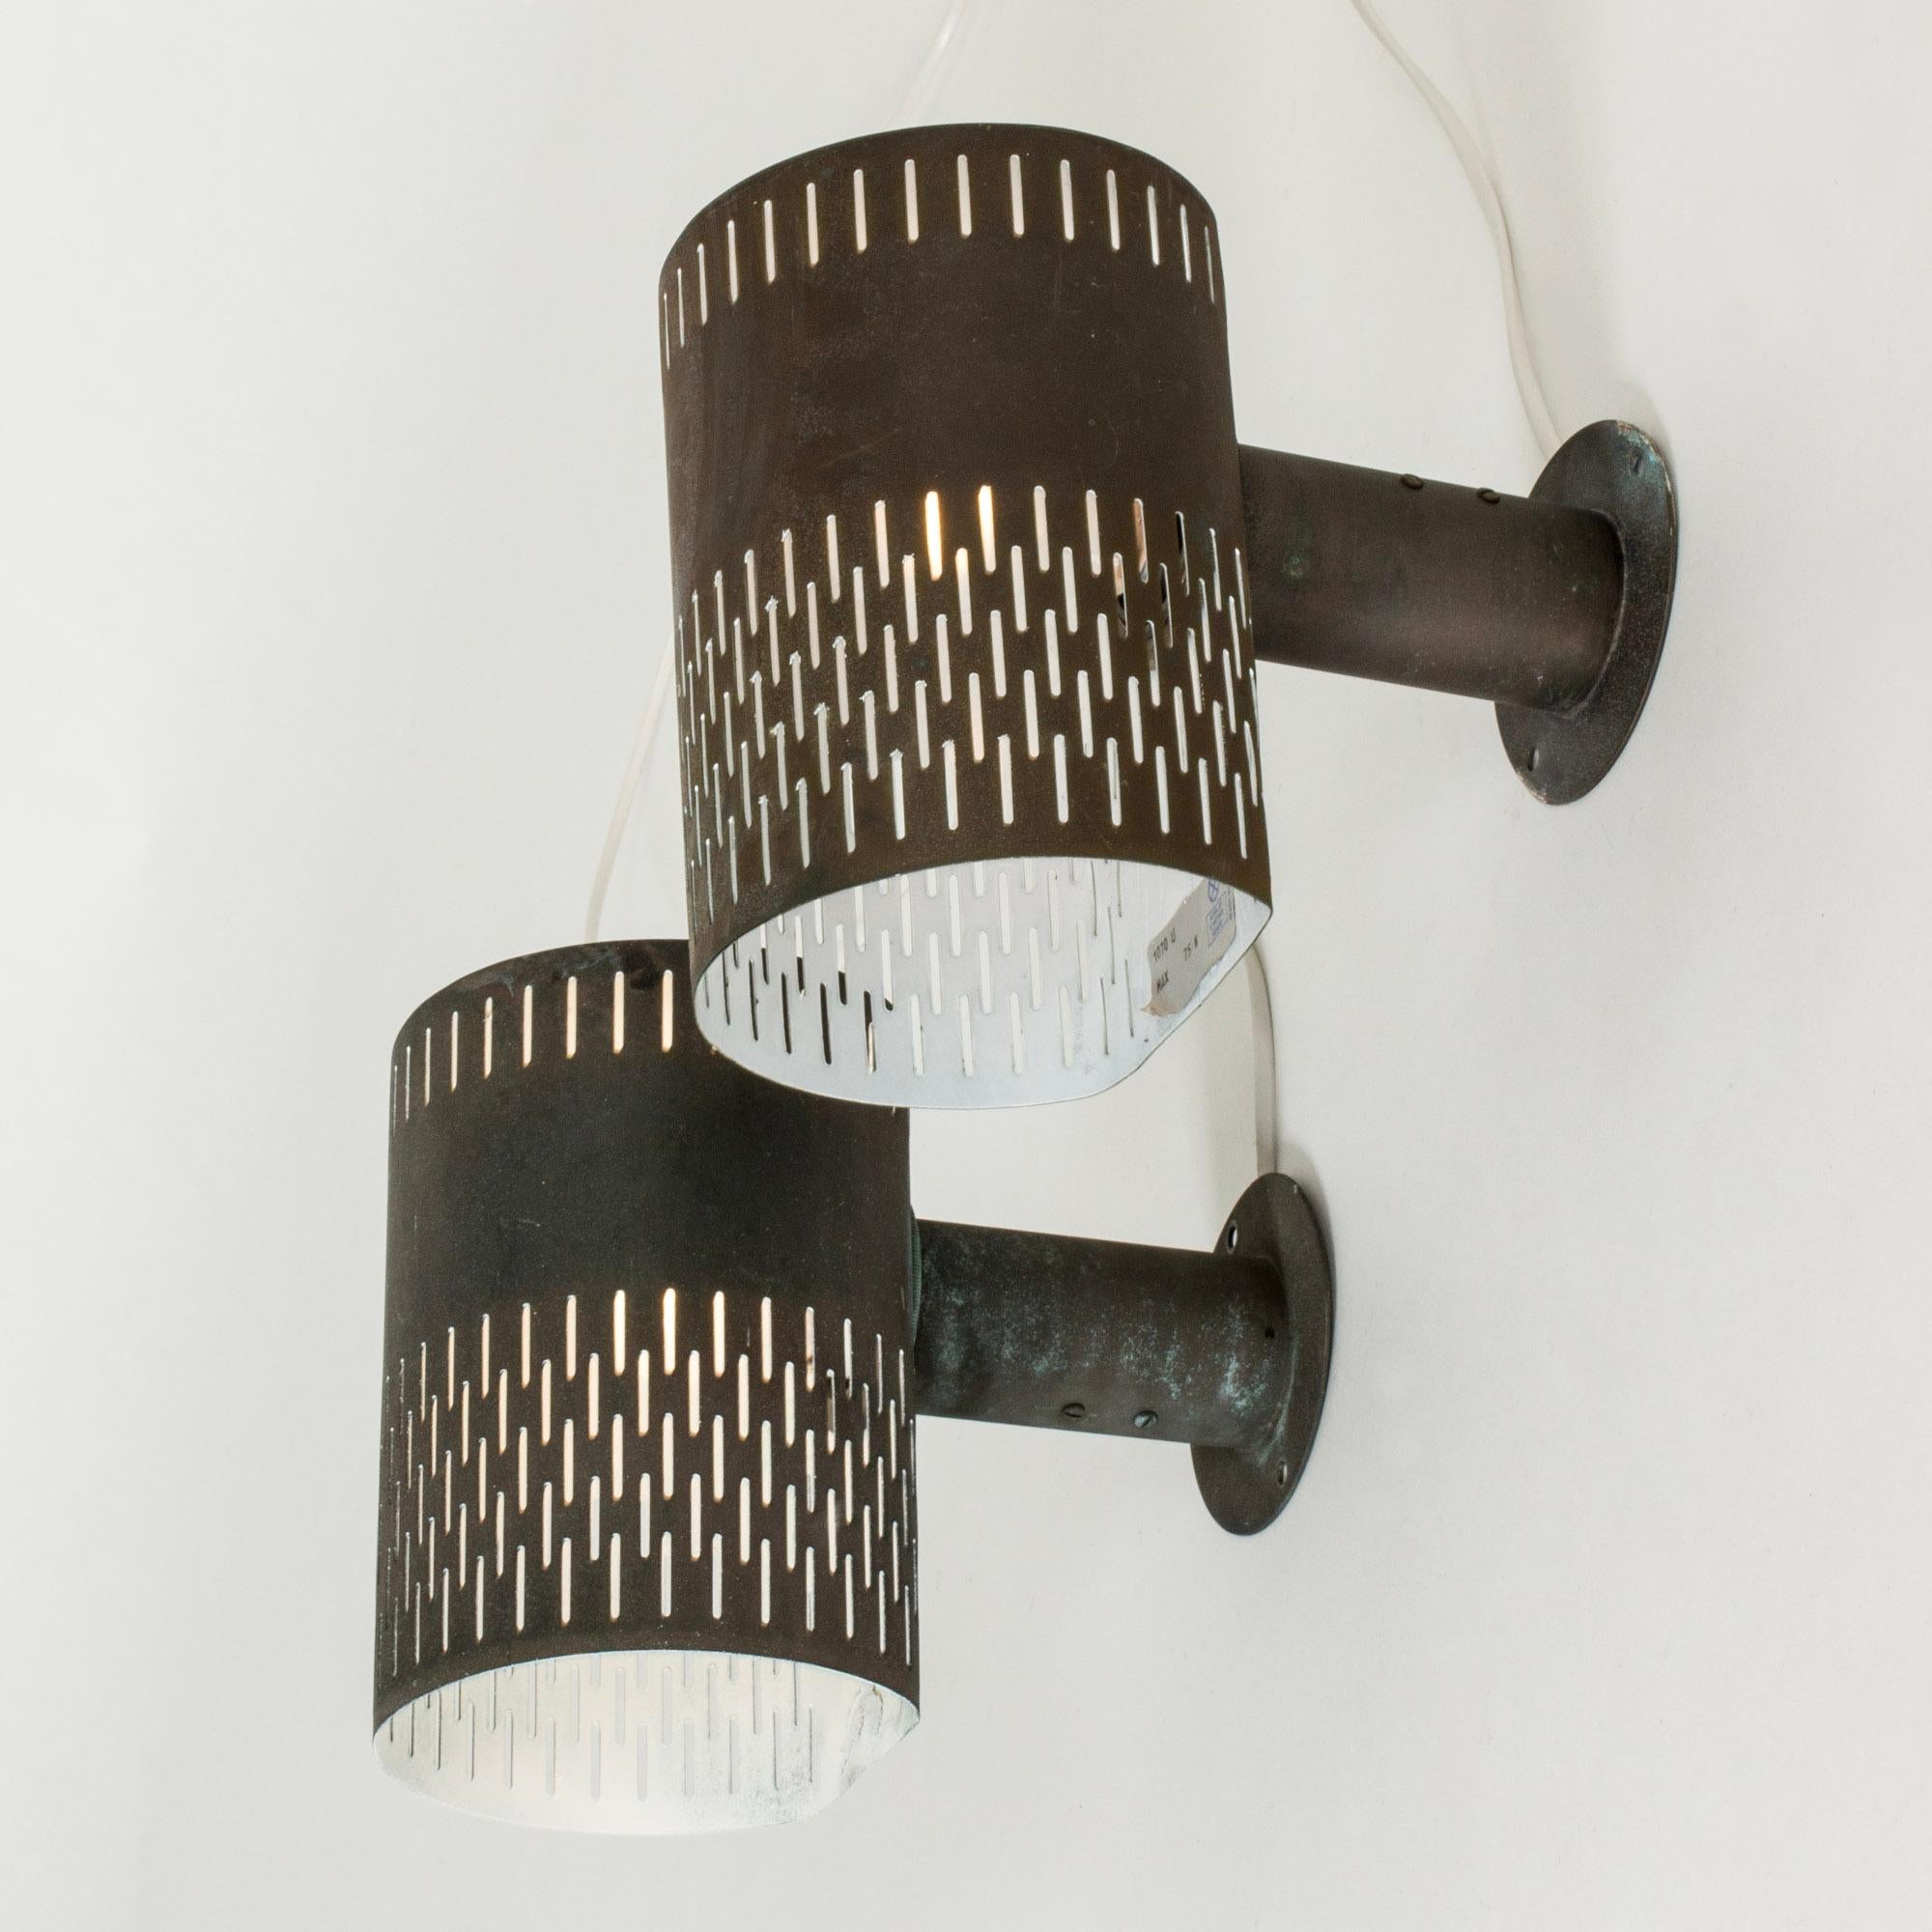 Very cool pair of wall lights by Hans Bergström, made from copper. Cylinder forms with a cutout graphic pattern.

Rewired but need to be installed by an electrician if mounted outdoors.

Hans Bergström was the owner and creative director of the